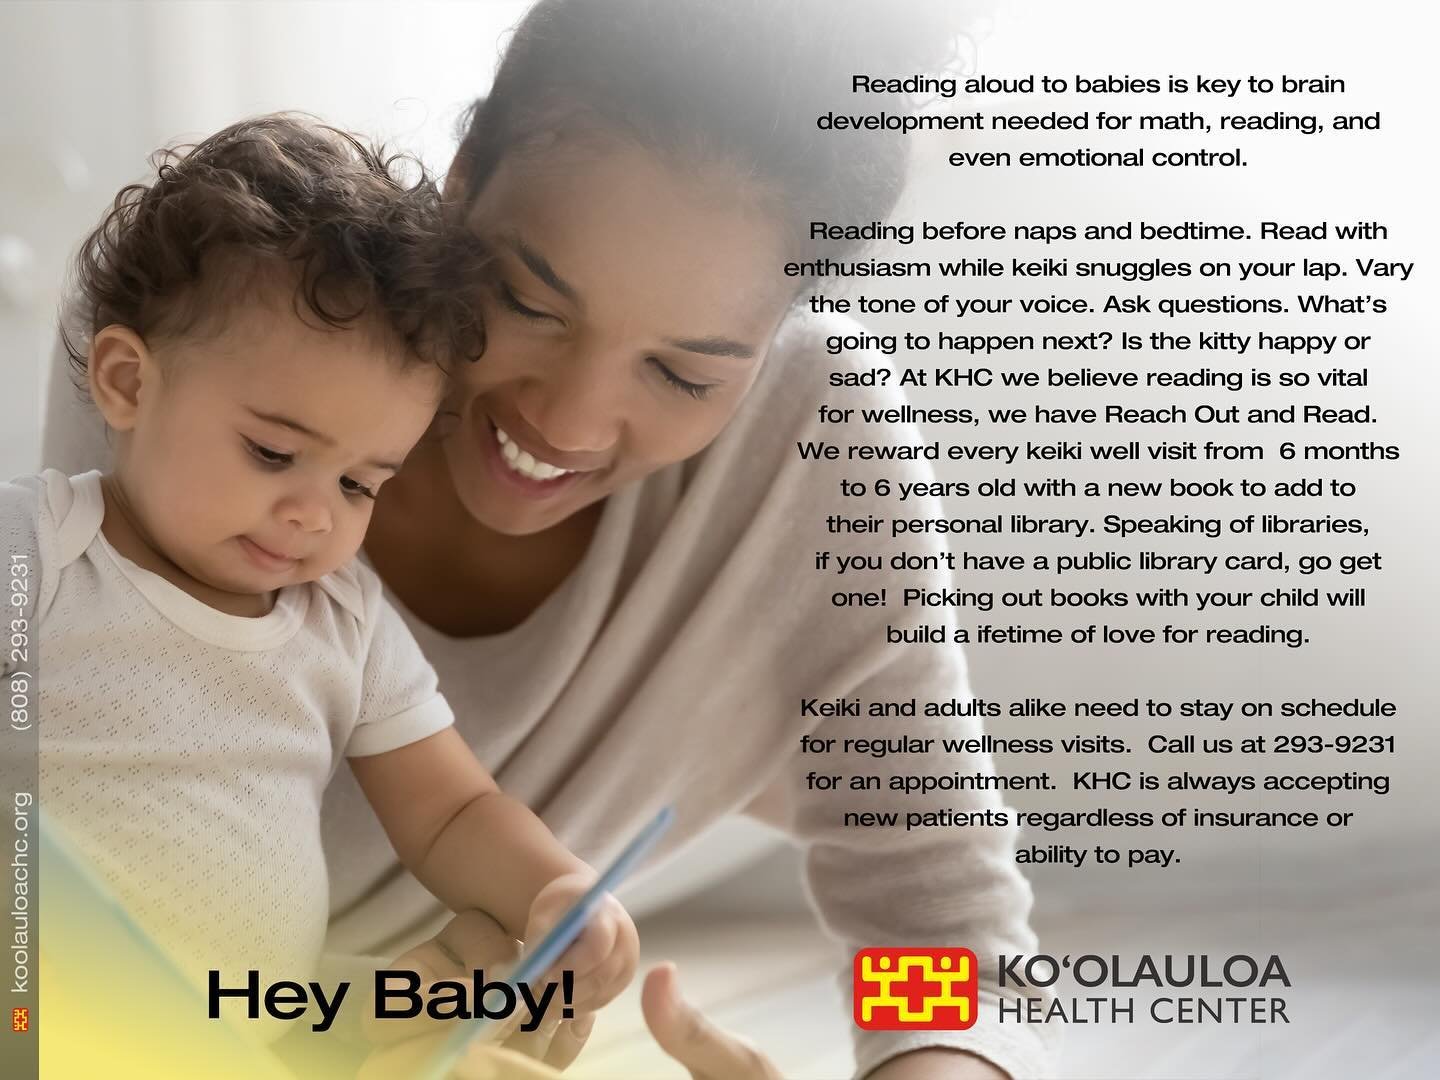 Aloha &lsquo;Ohana,

Did you know that reading aloud to babies is key to brain development needed for math, reading, and even emotional control?

Reading before naps and bedtime. Read with enthusiasm while keiki snuggles on your lap. Vary the tone of